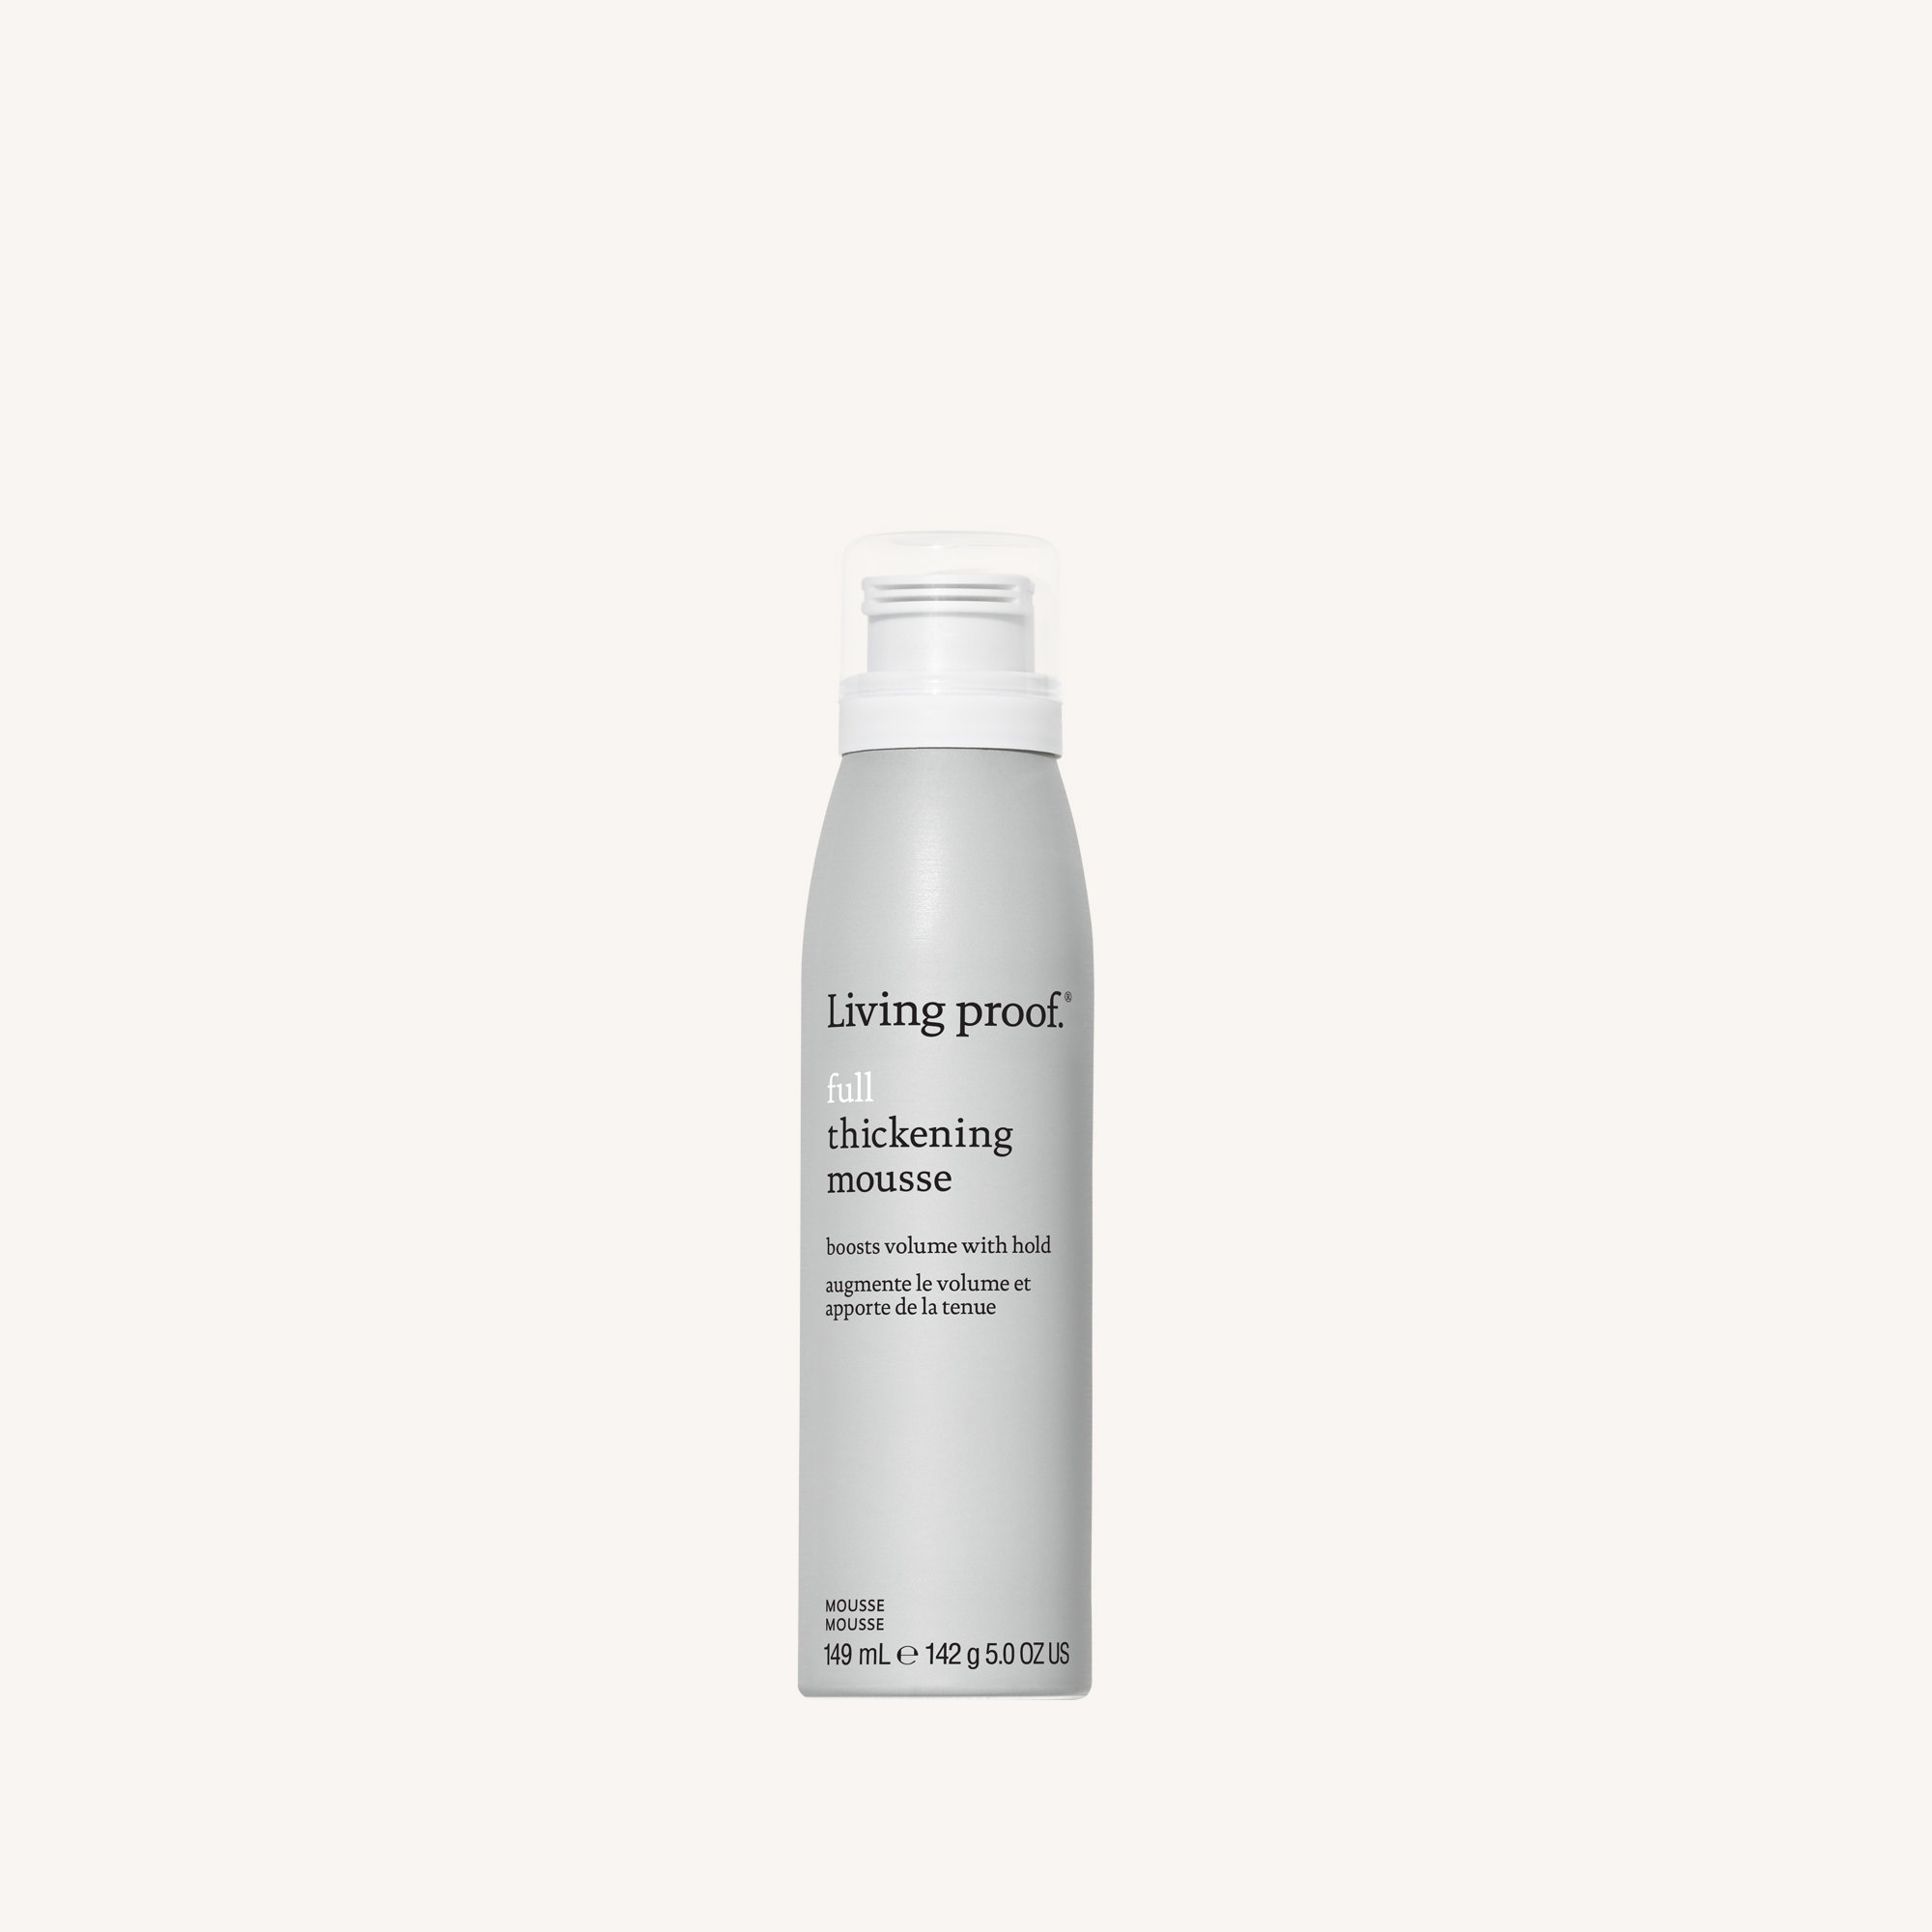 A lightweight mousse with flexible hold for long-lasting touchable body and fullness.